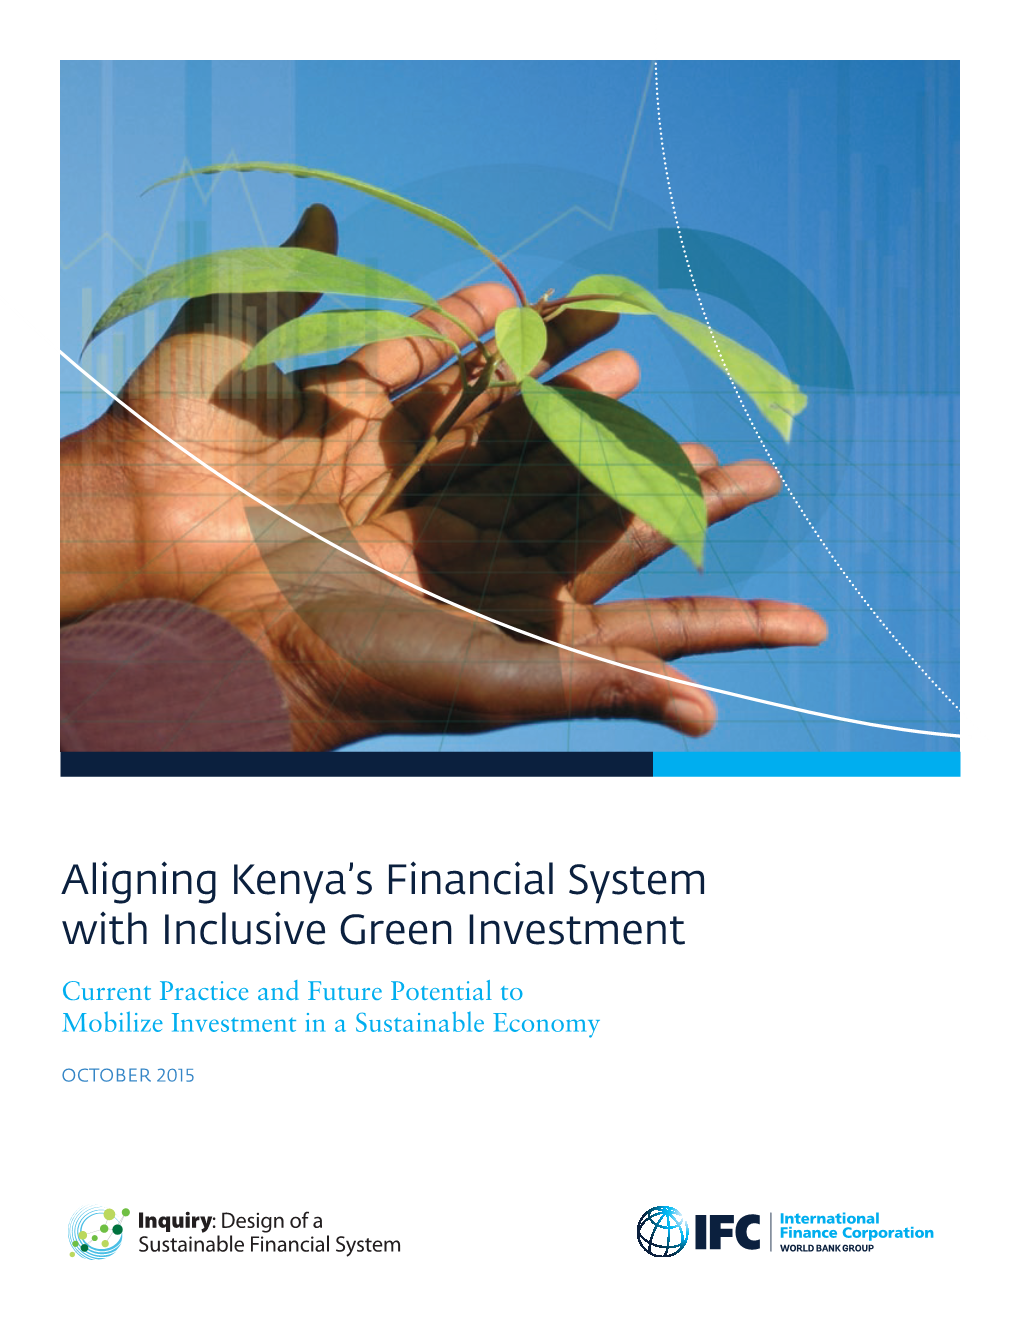 Aligning Kenya's Financial System with Inclusive Green Investment